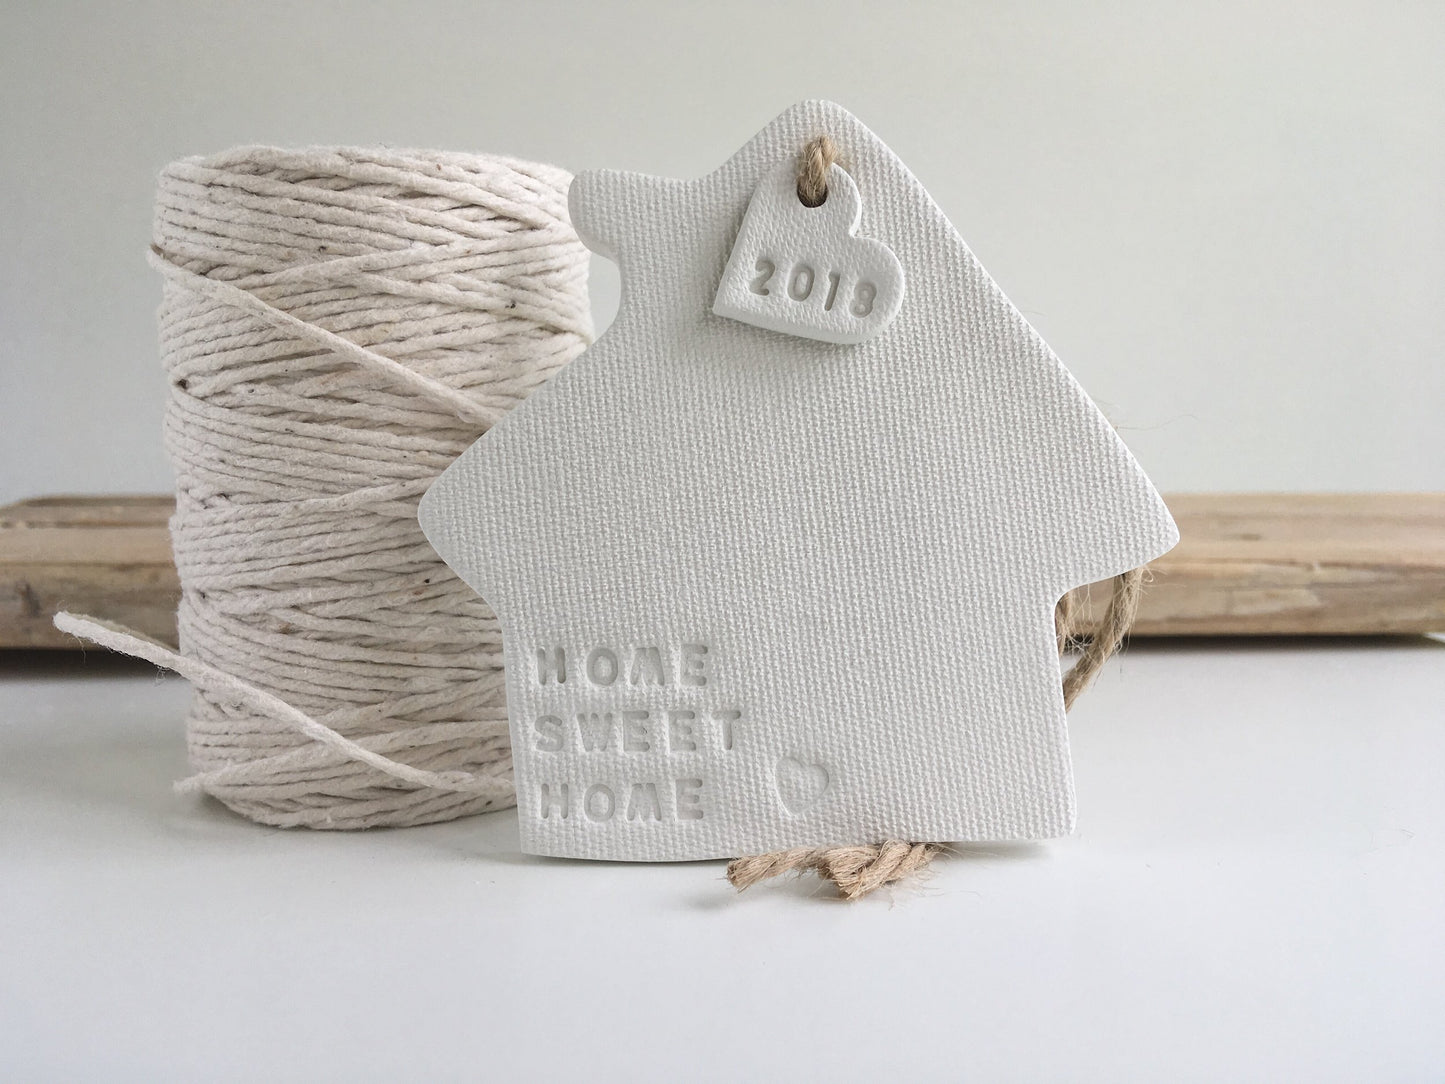 Clay housewarming gift stamped with Home Sweet Home